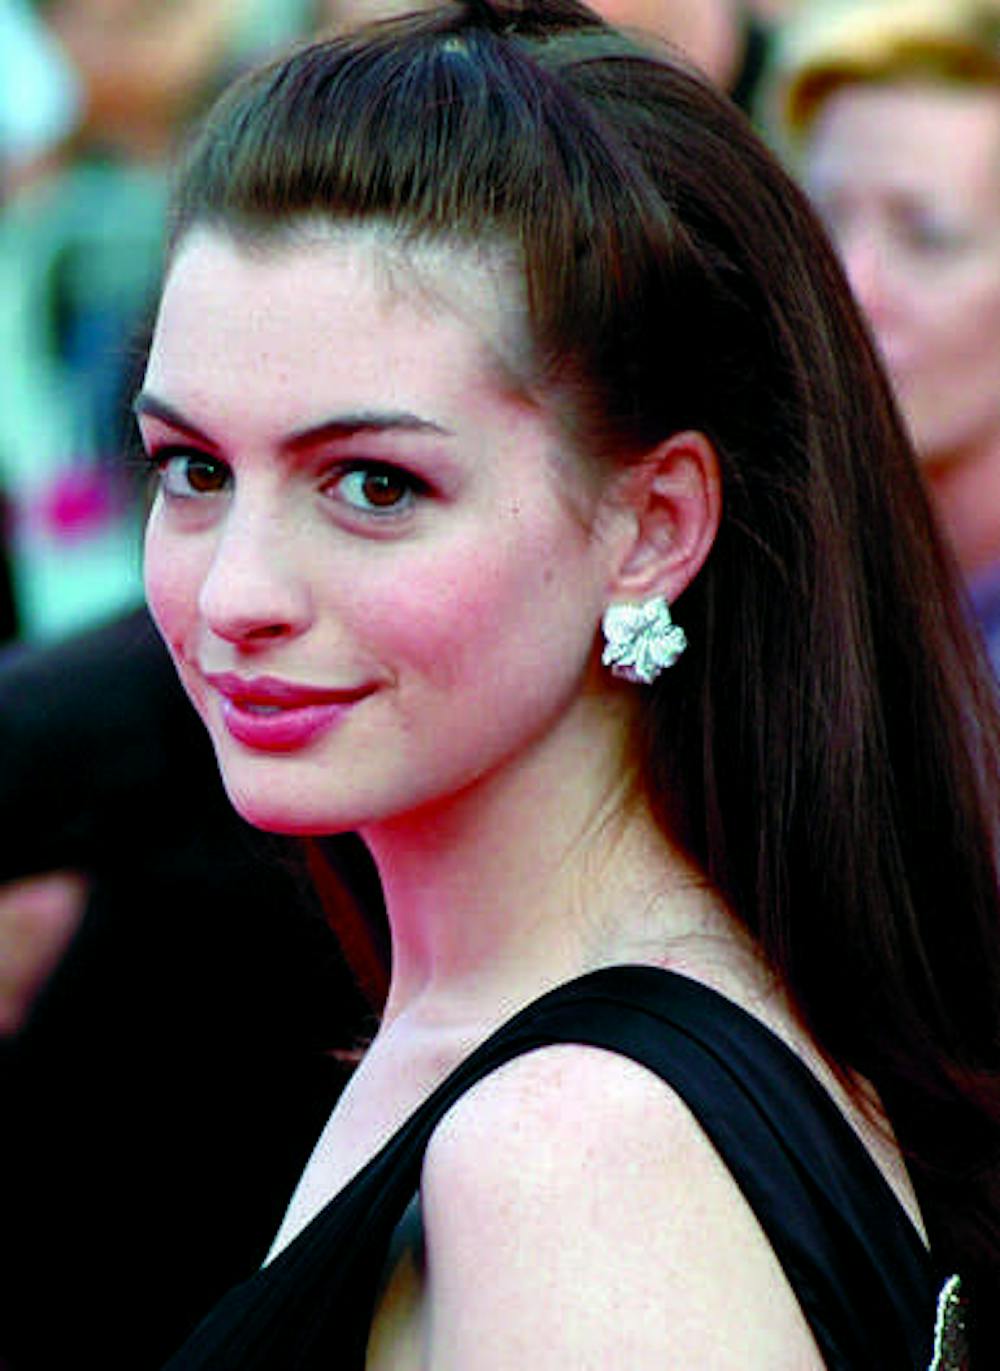 Anne Hathaway surprises fans with a sentimental performance as Jules Ostin in The Intern.